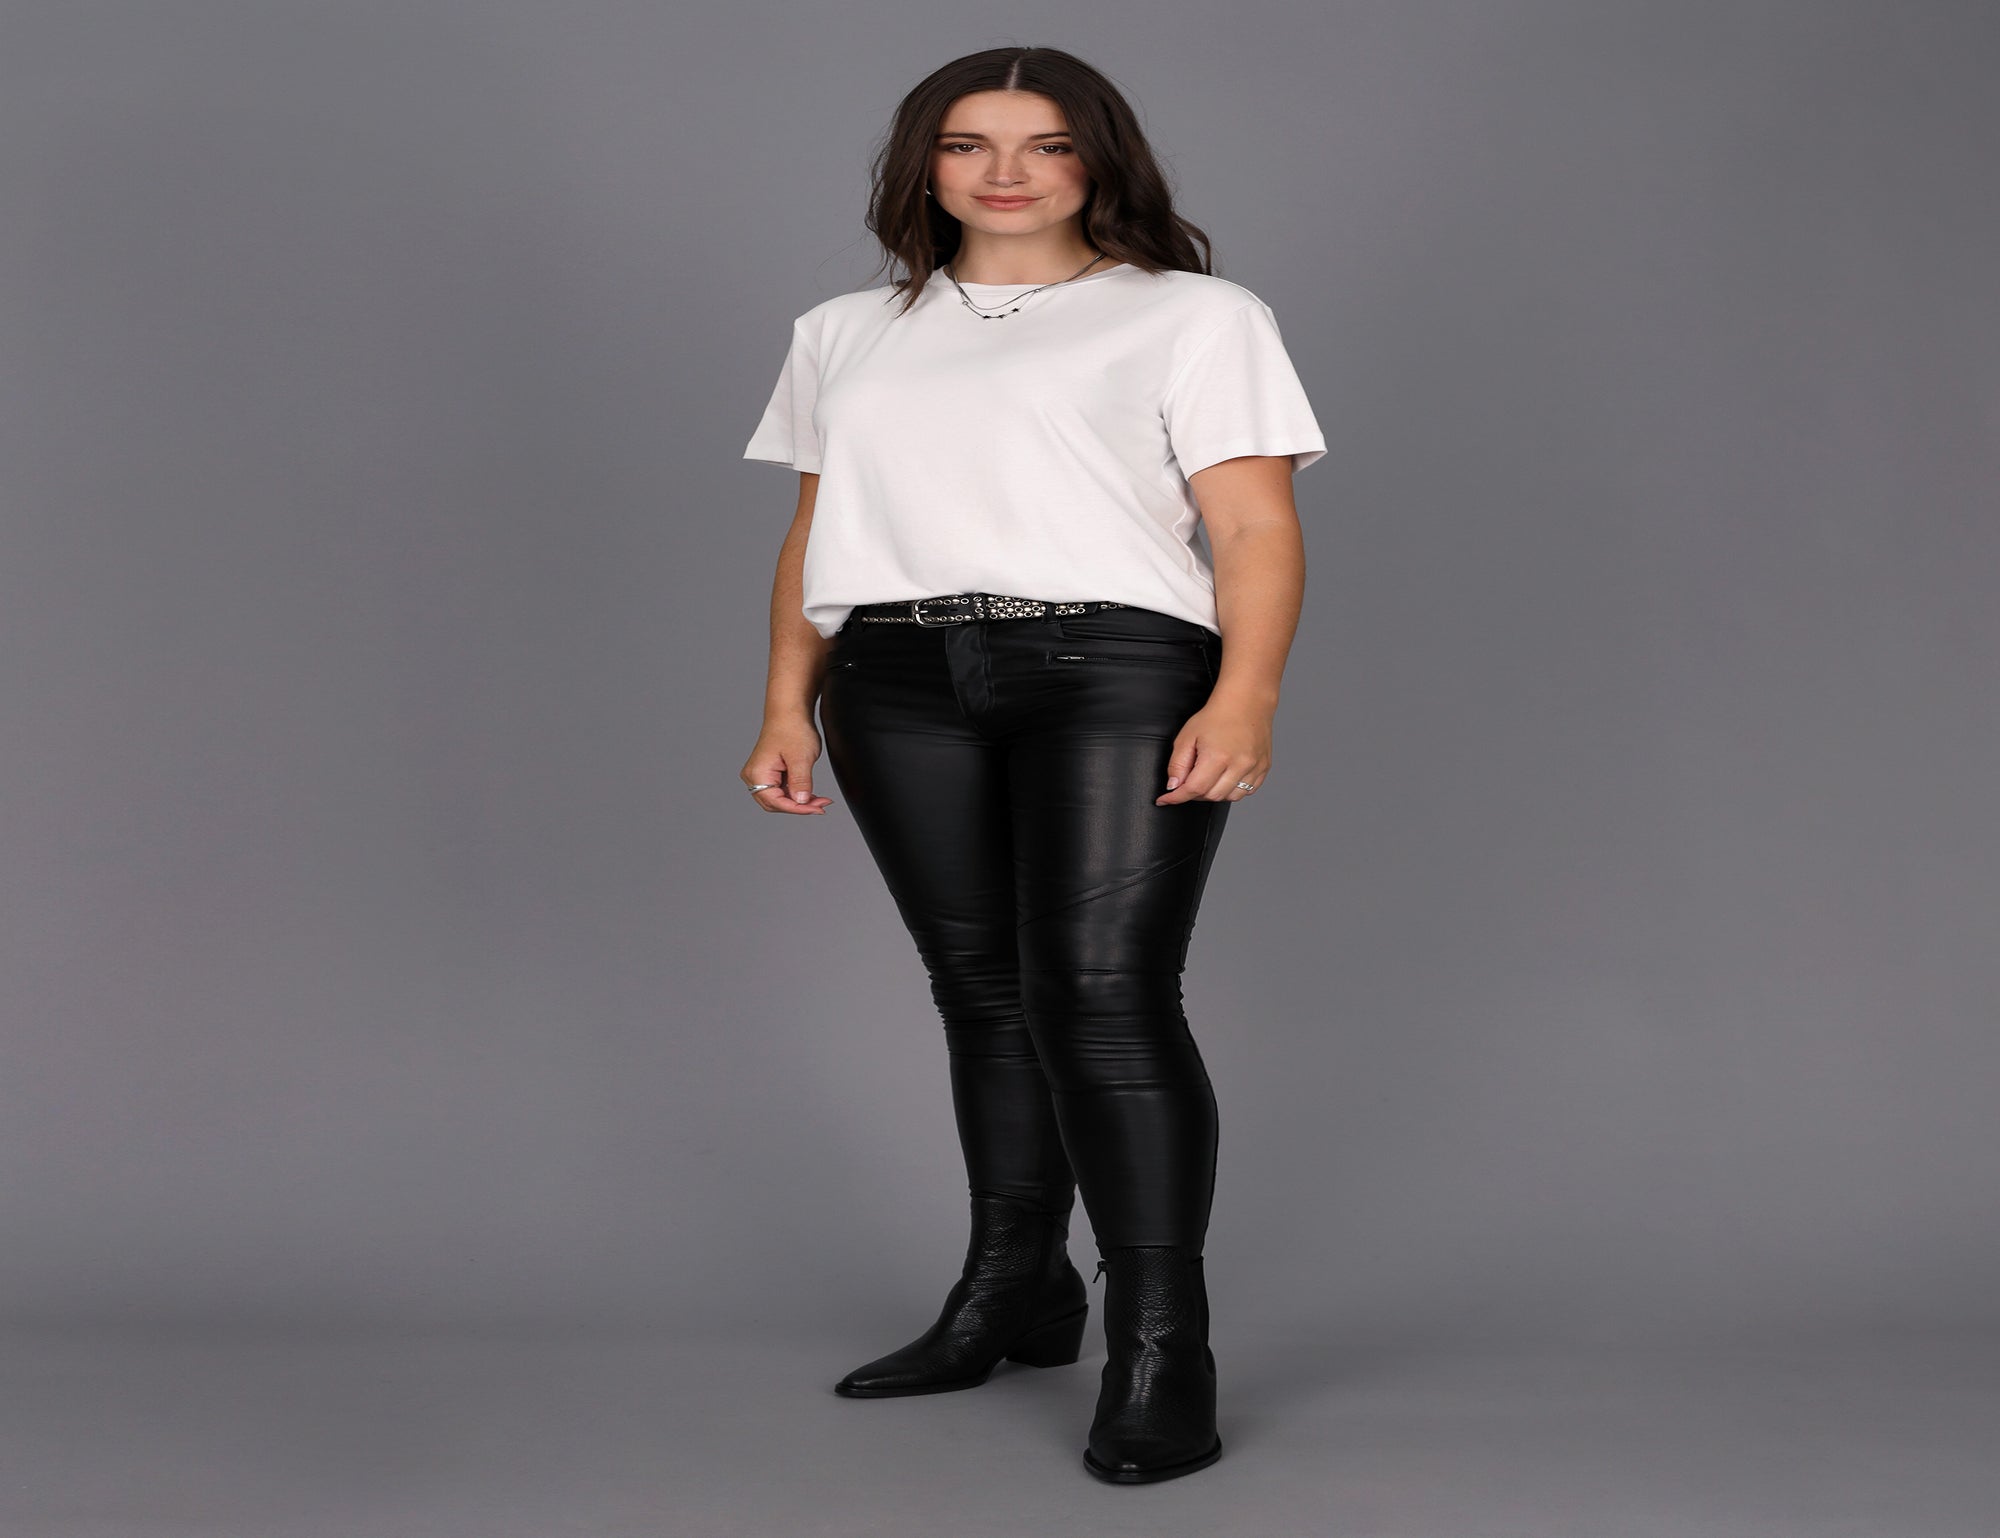 Mid Rise Leather Look Pant - Black - Pants - Full Length - Women's Clothing  - Storm